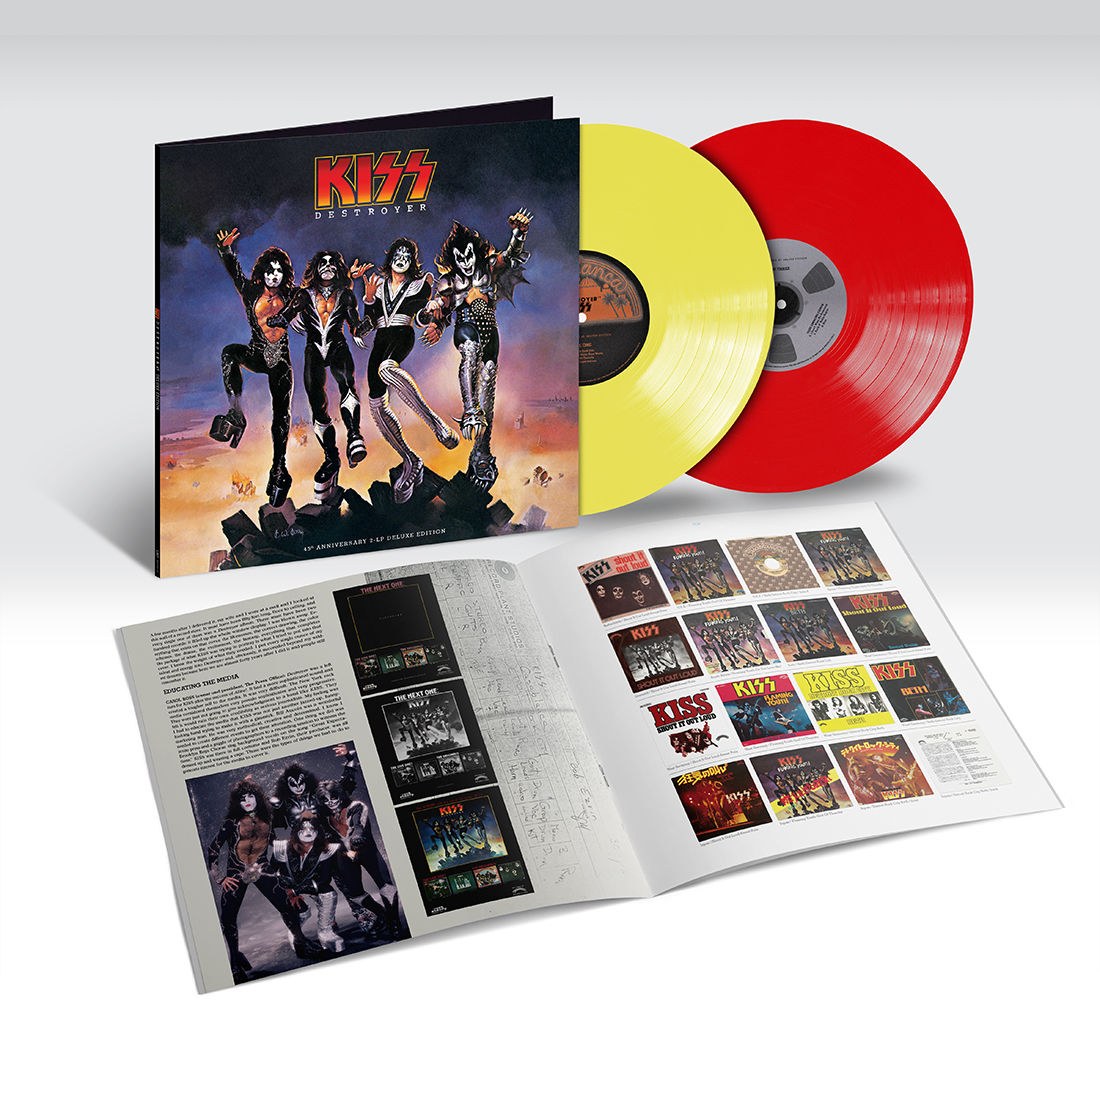 Kiss - Destroyer - 45th Anniversary: Exclusive Opaque Yellow & Red Vinyl 2LP